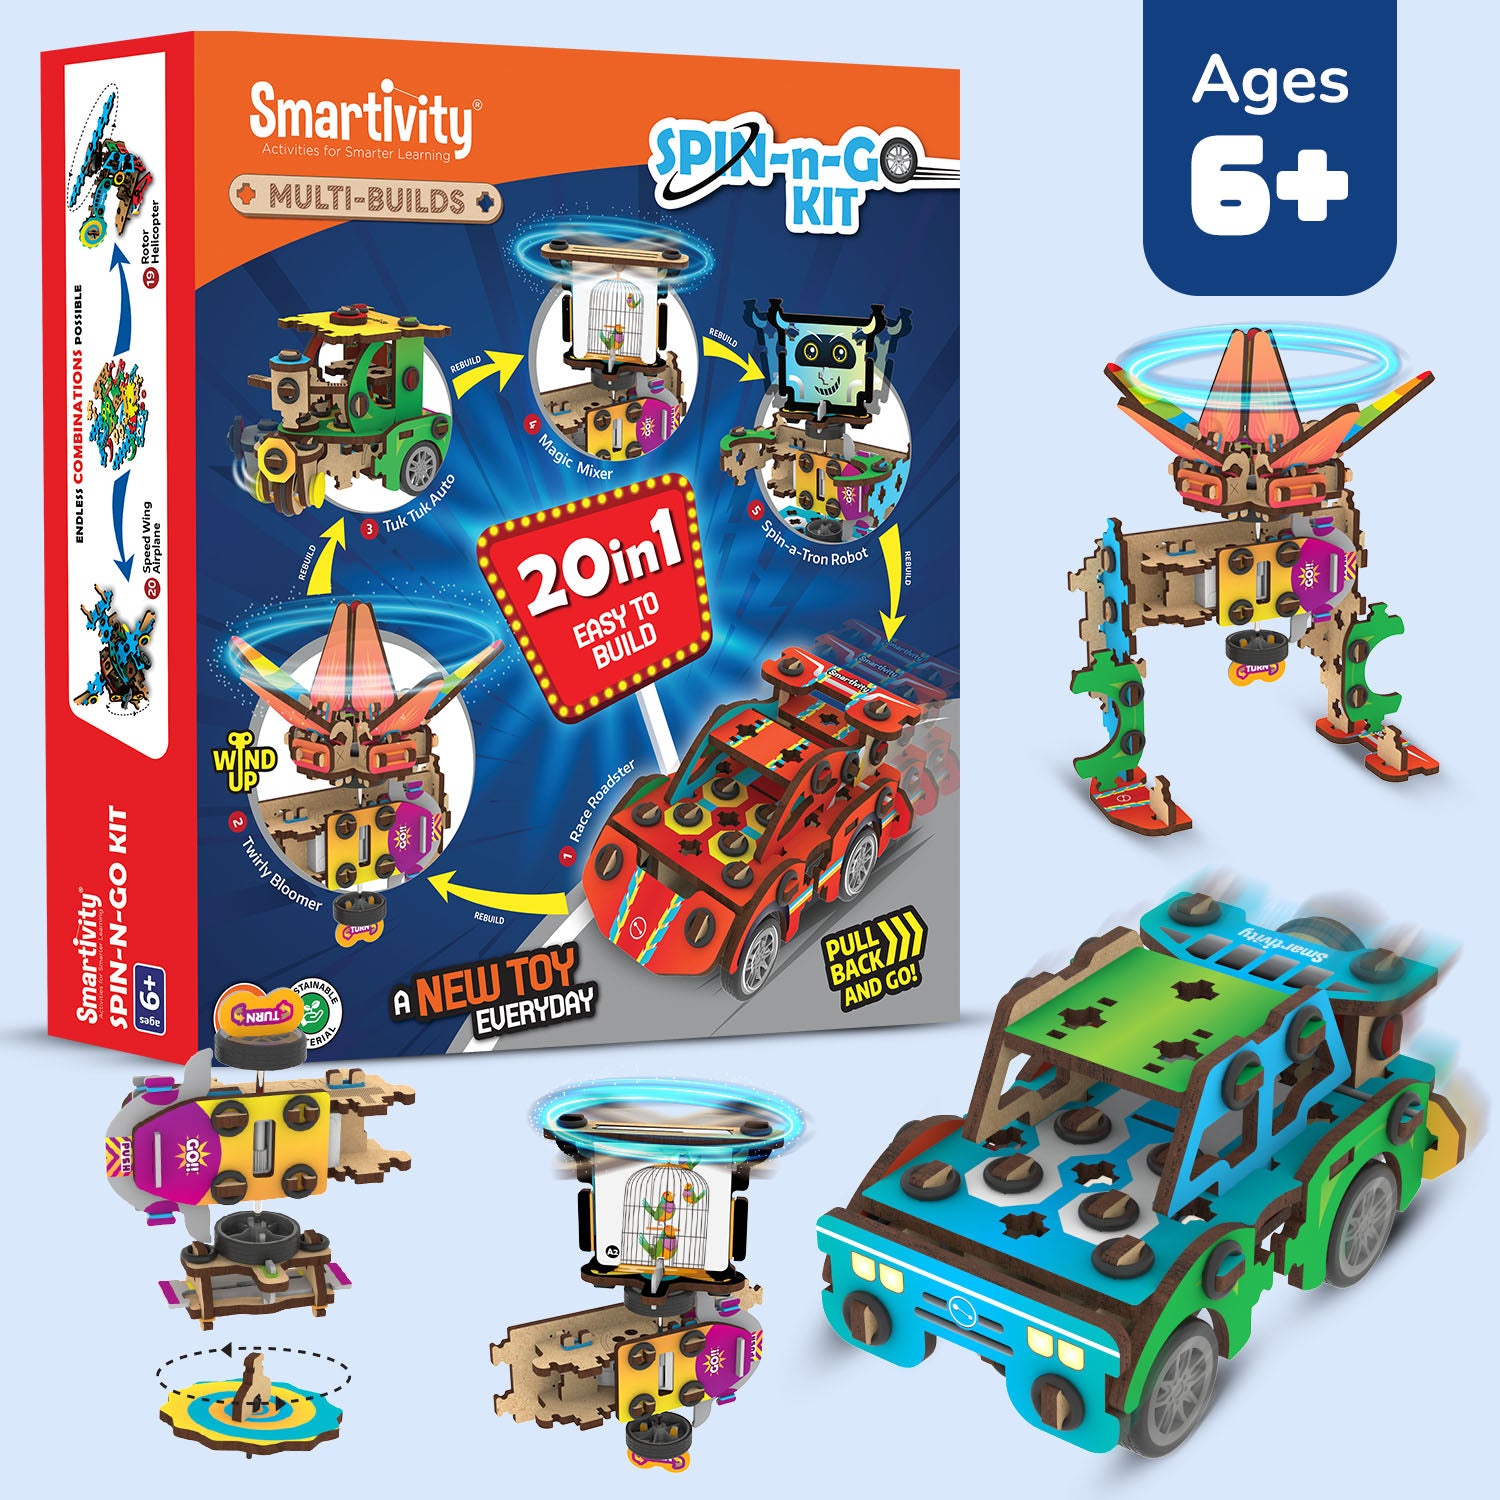 Multi-Builds Spin-n-Go Kit | 6-10 years | DIY STEM Construction Toy